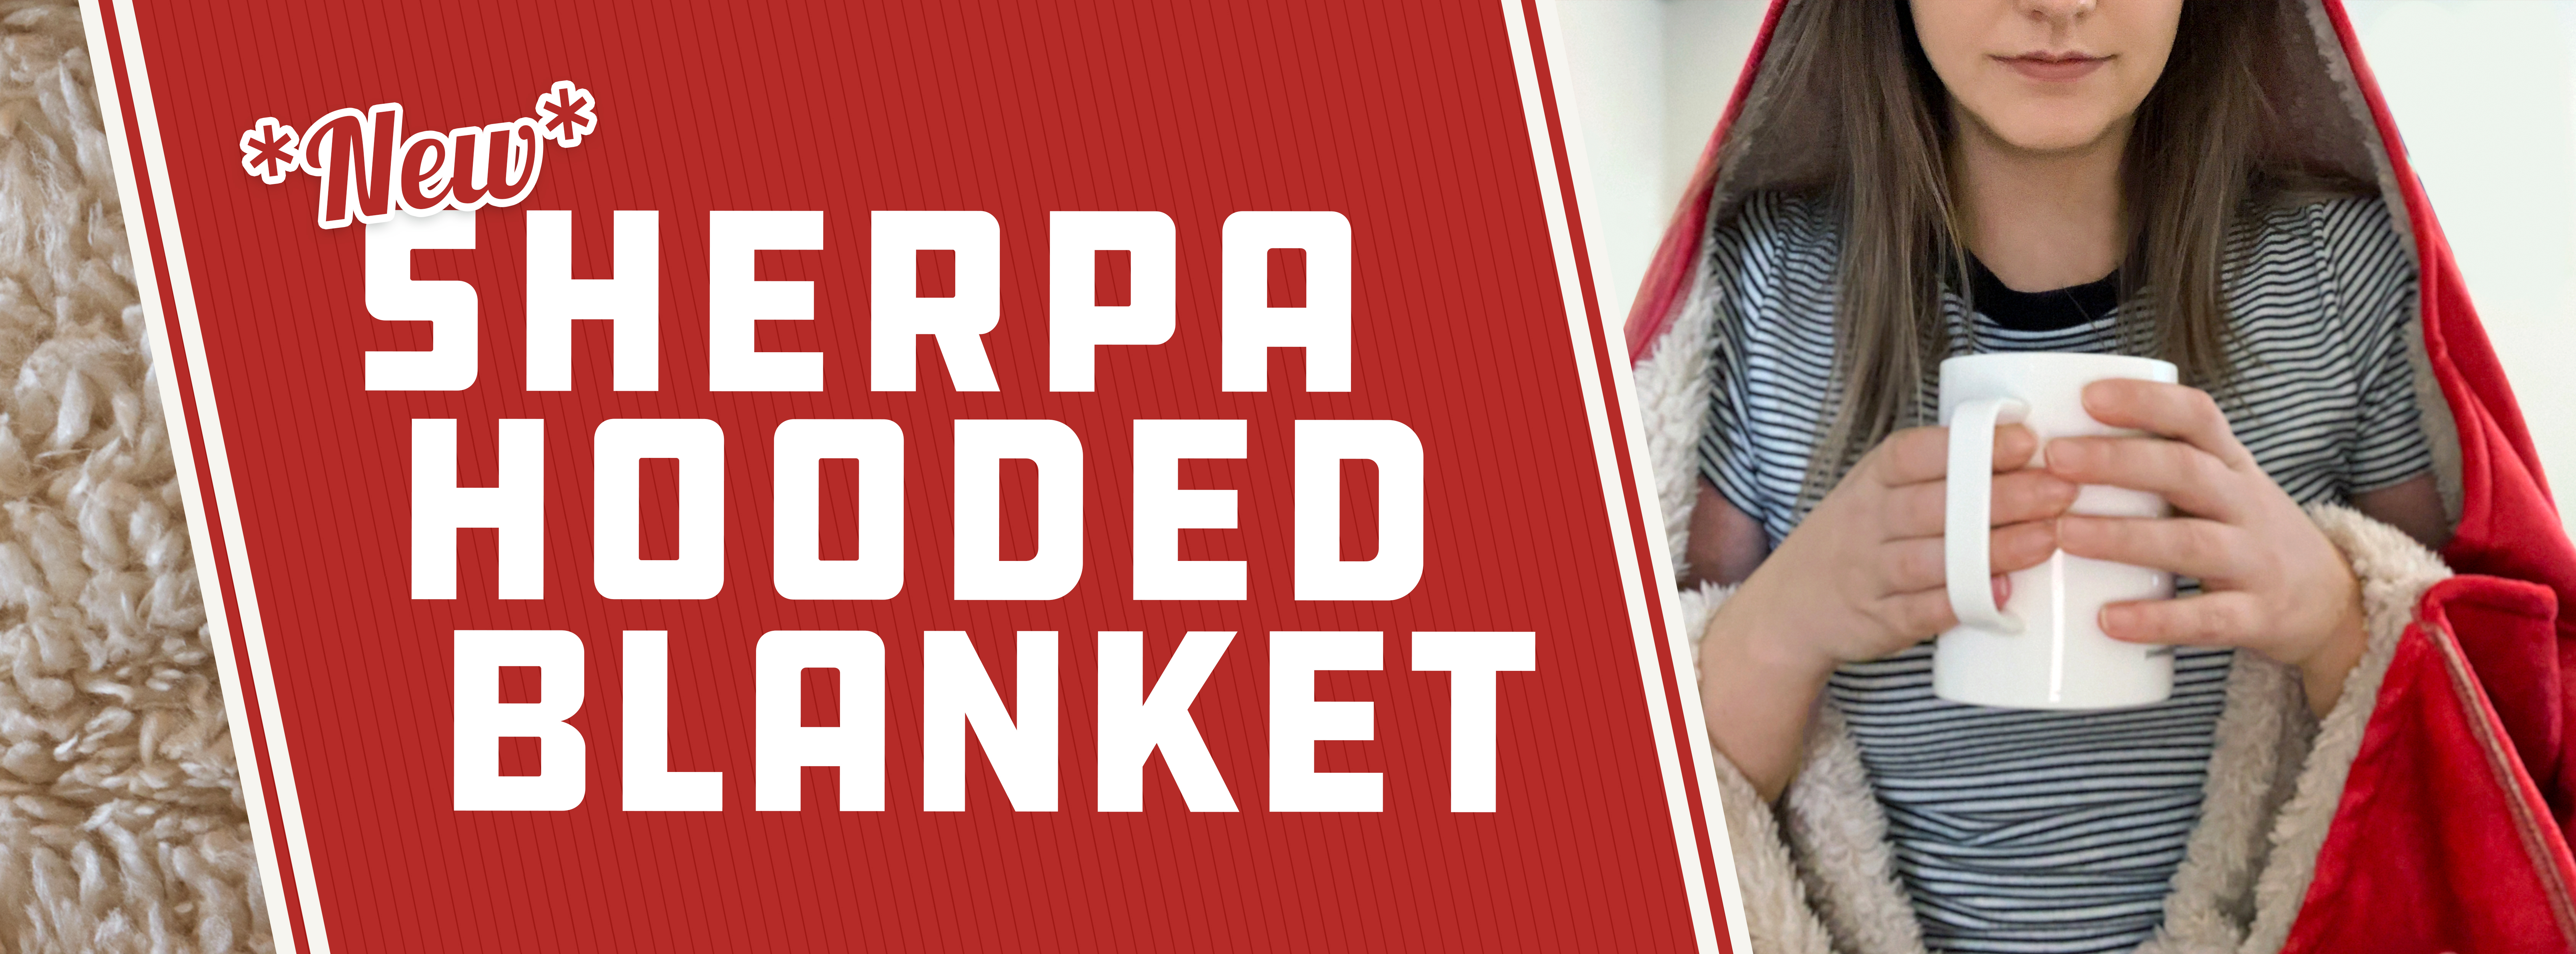 Sherpa Hooded Blankets: Giving Your Customers More Options